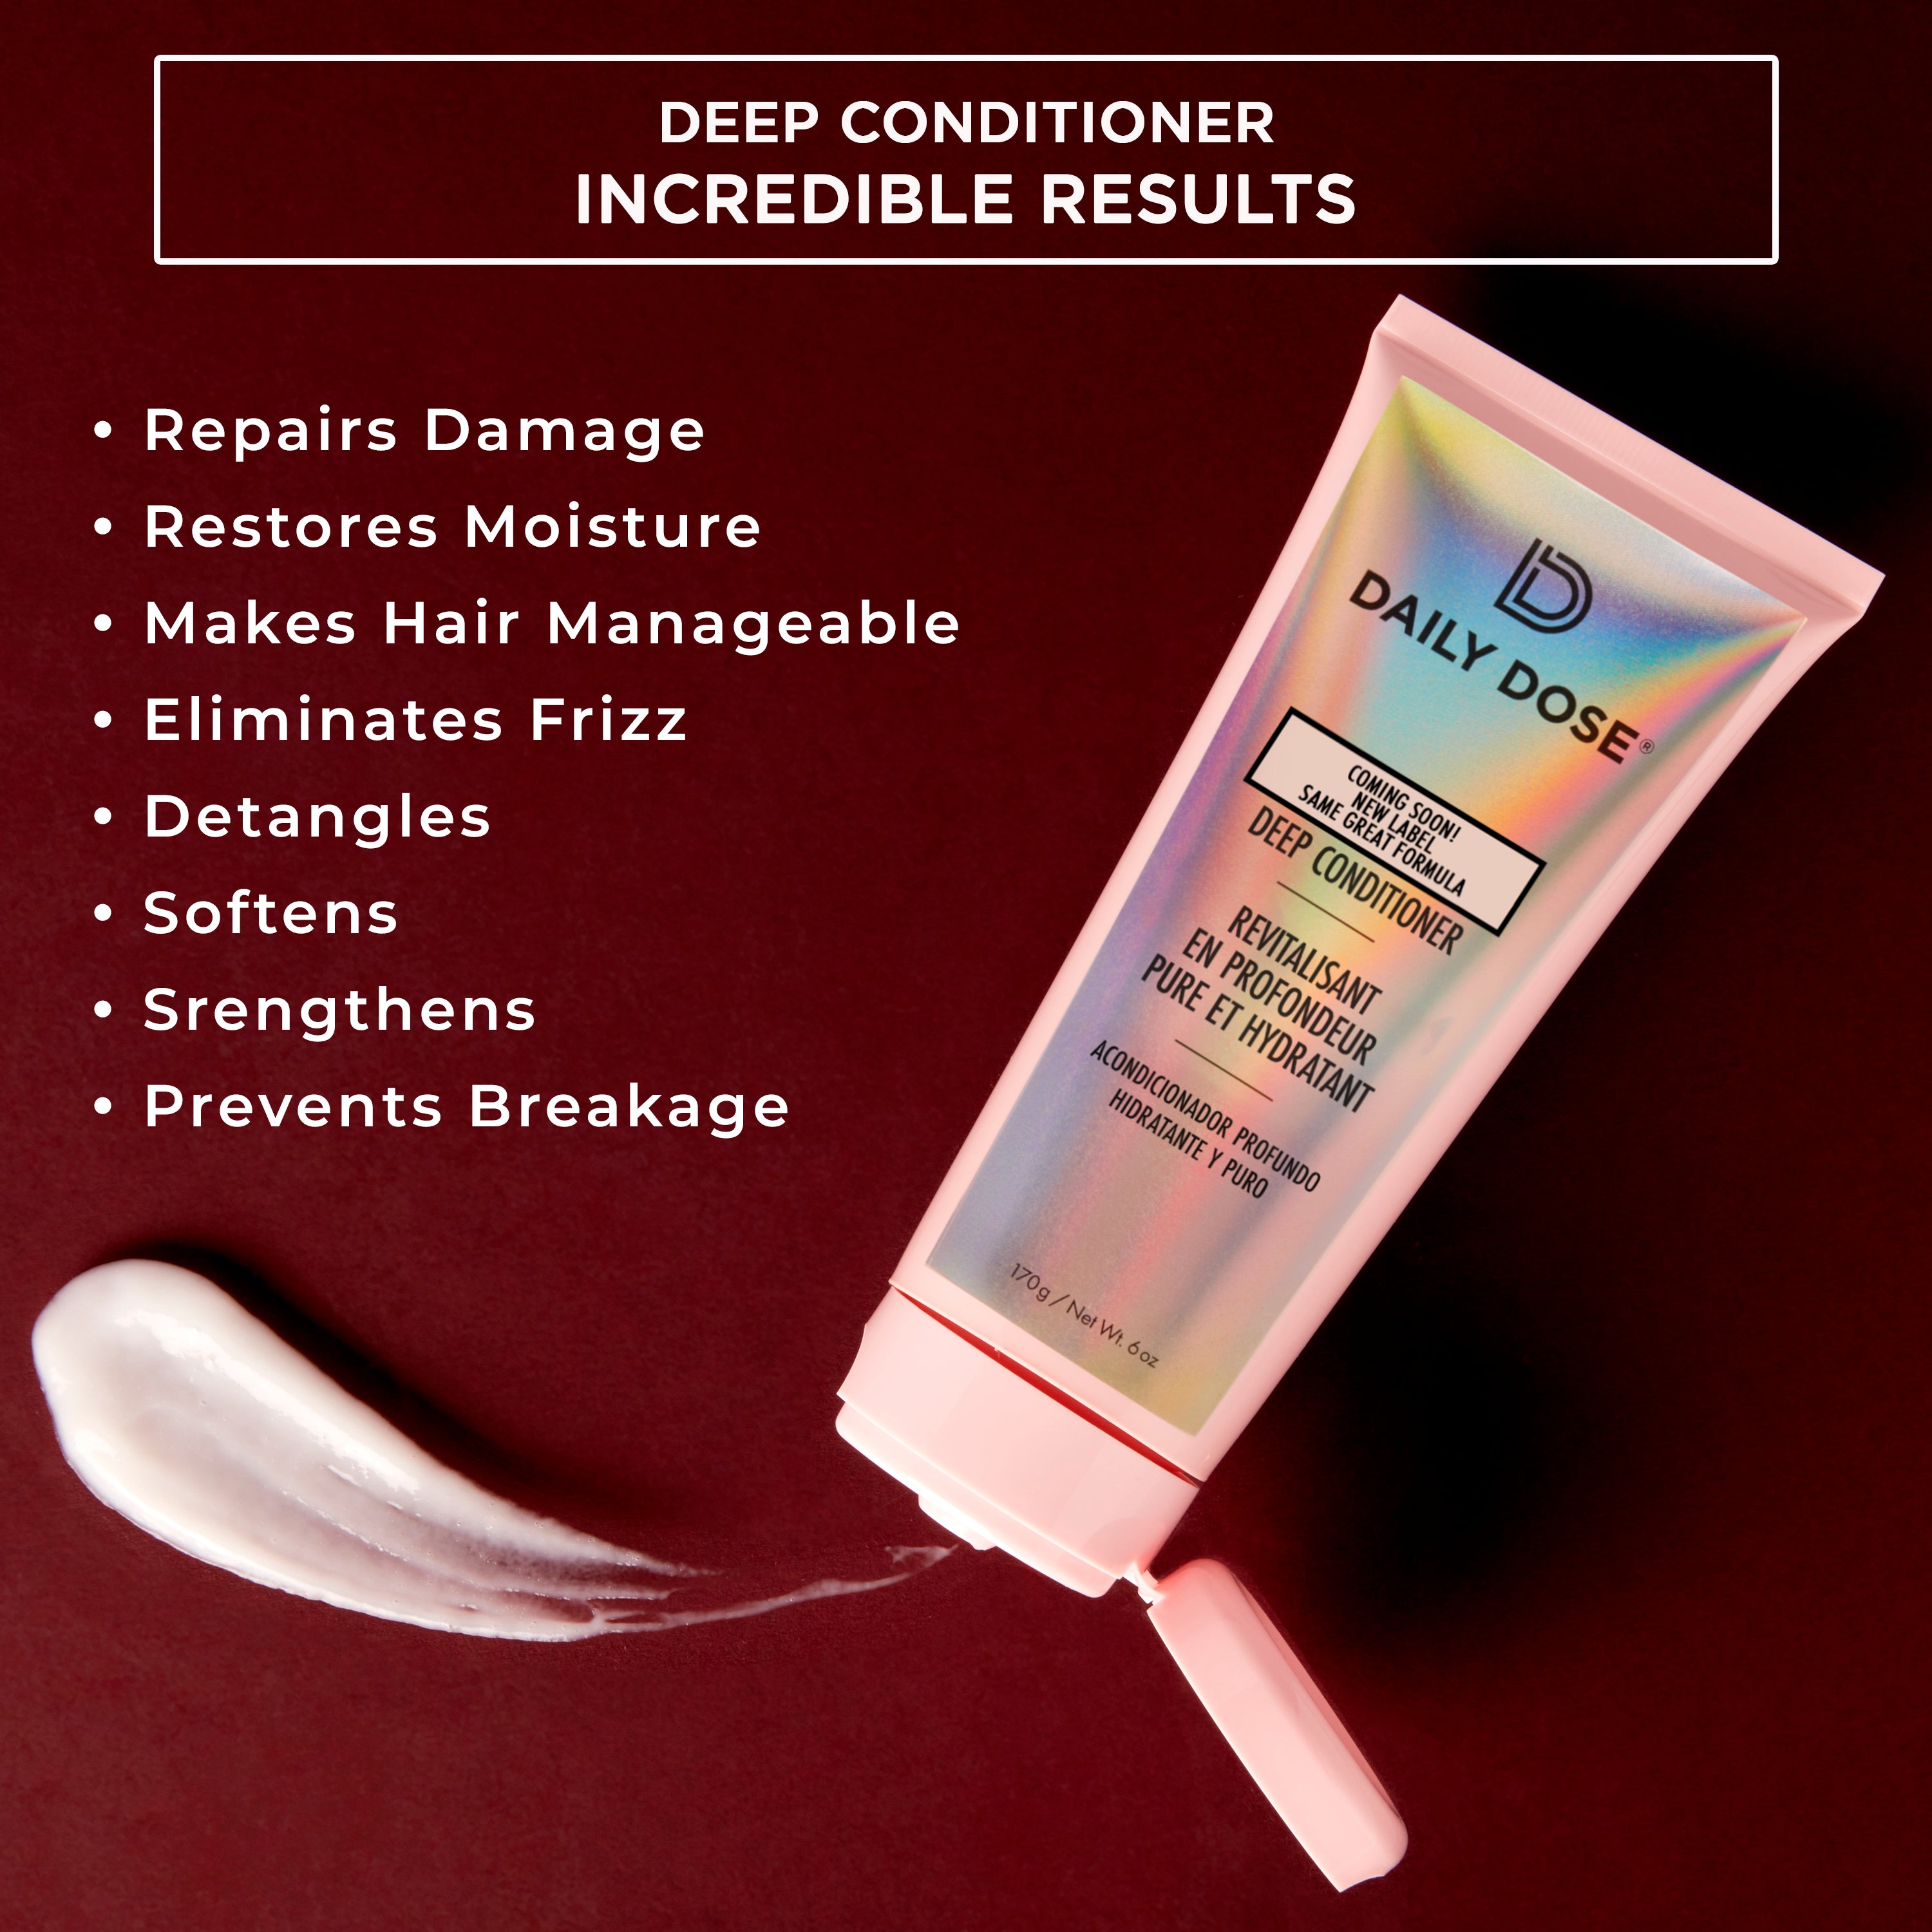 Daily Dose Moisturizing Duo: Leave-In Conditioner Detangler Spray + Deep Conditioner, Hair Mask/Masque - Detangles, Repairs, Restores Dry, Damaged, Color Treated Hair for All Hair Types